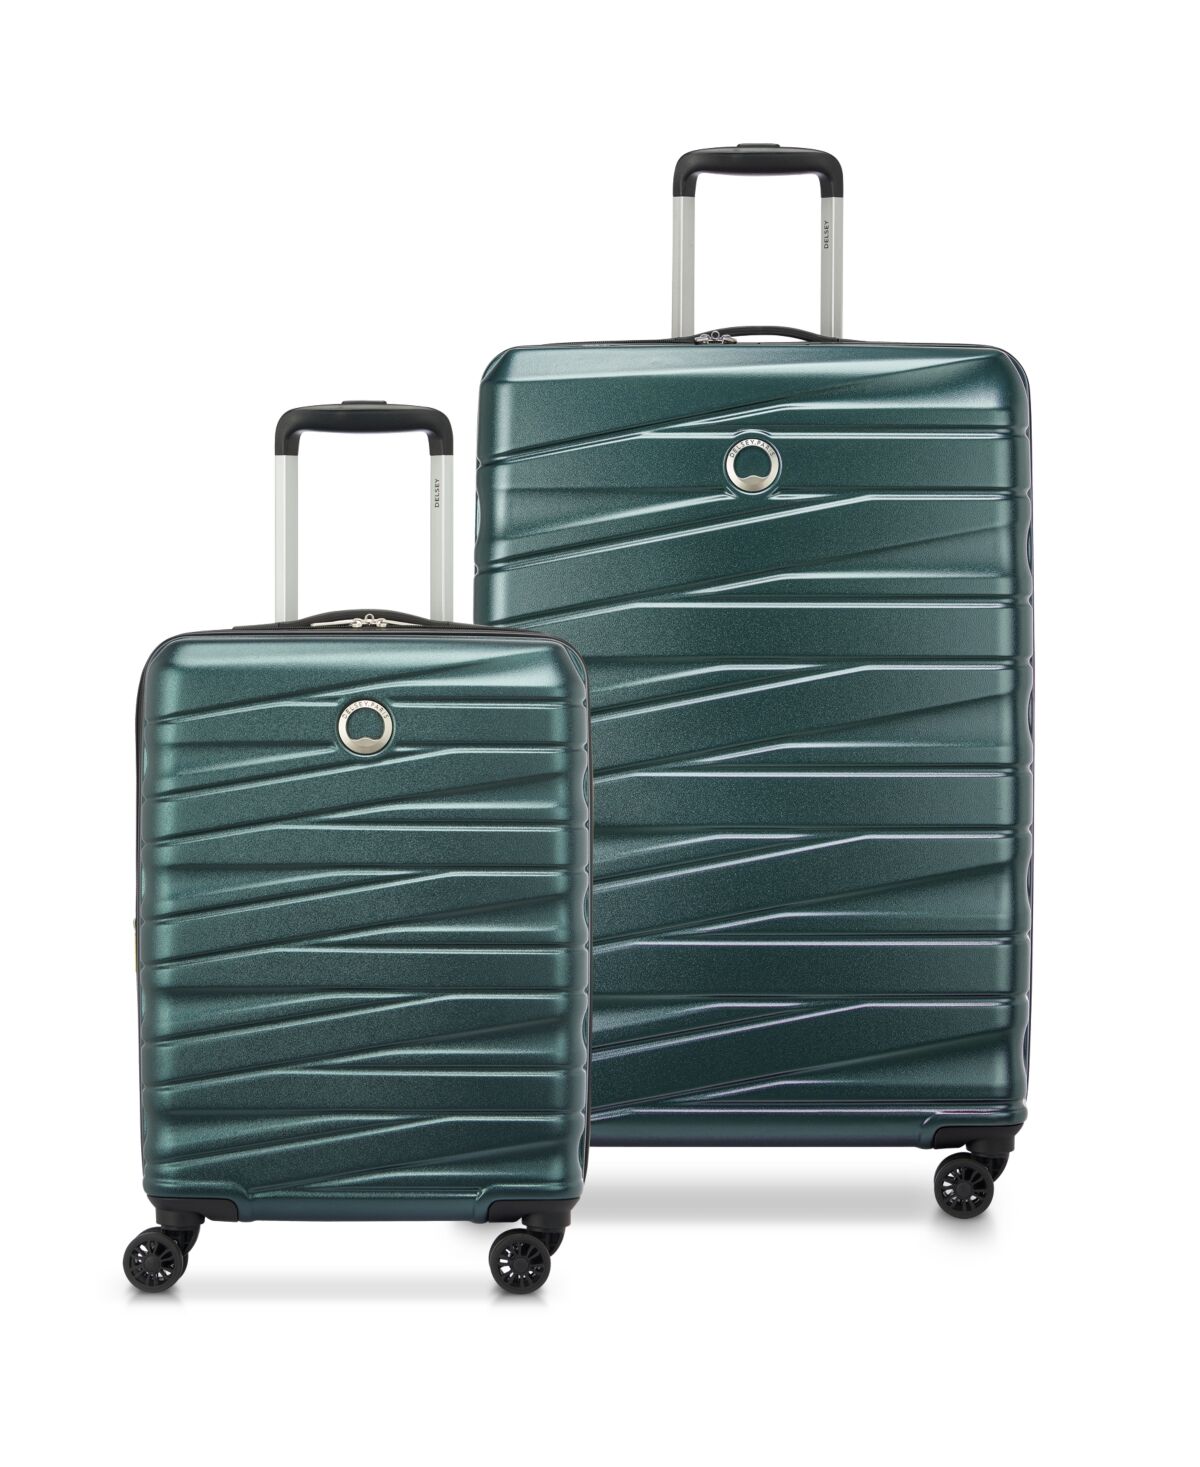 Delsey Cannes 2 Piece Hardside Luggage Set, Carry-On and 27